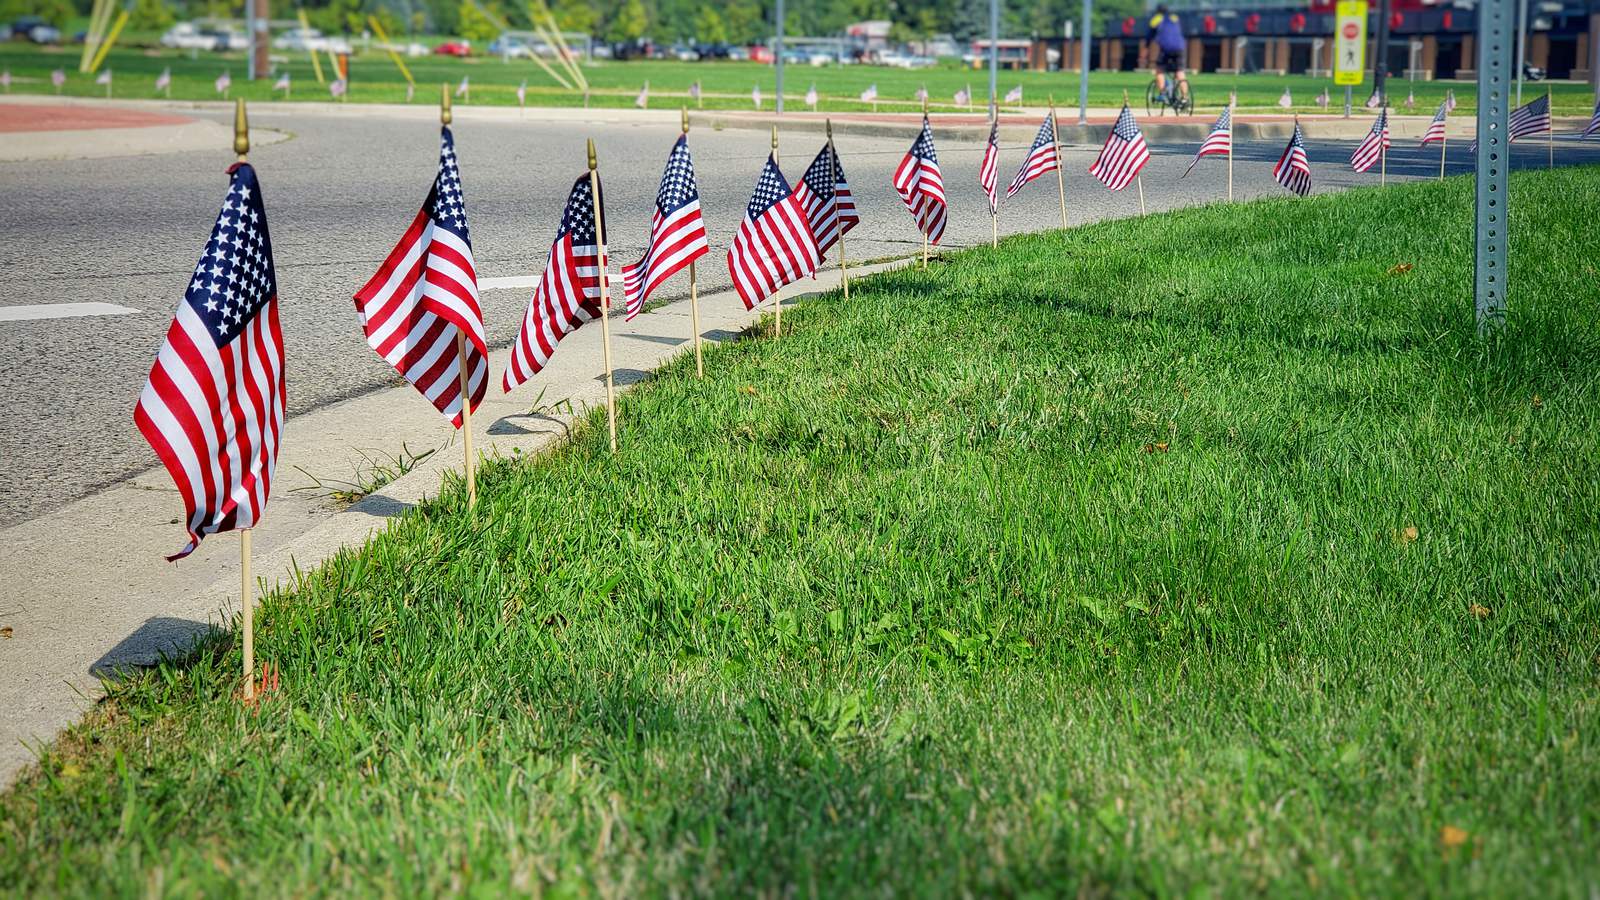 Concordia University students in Ann Arbor plant flags for 9/11 tribute